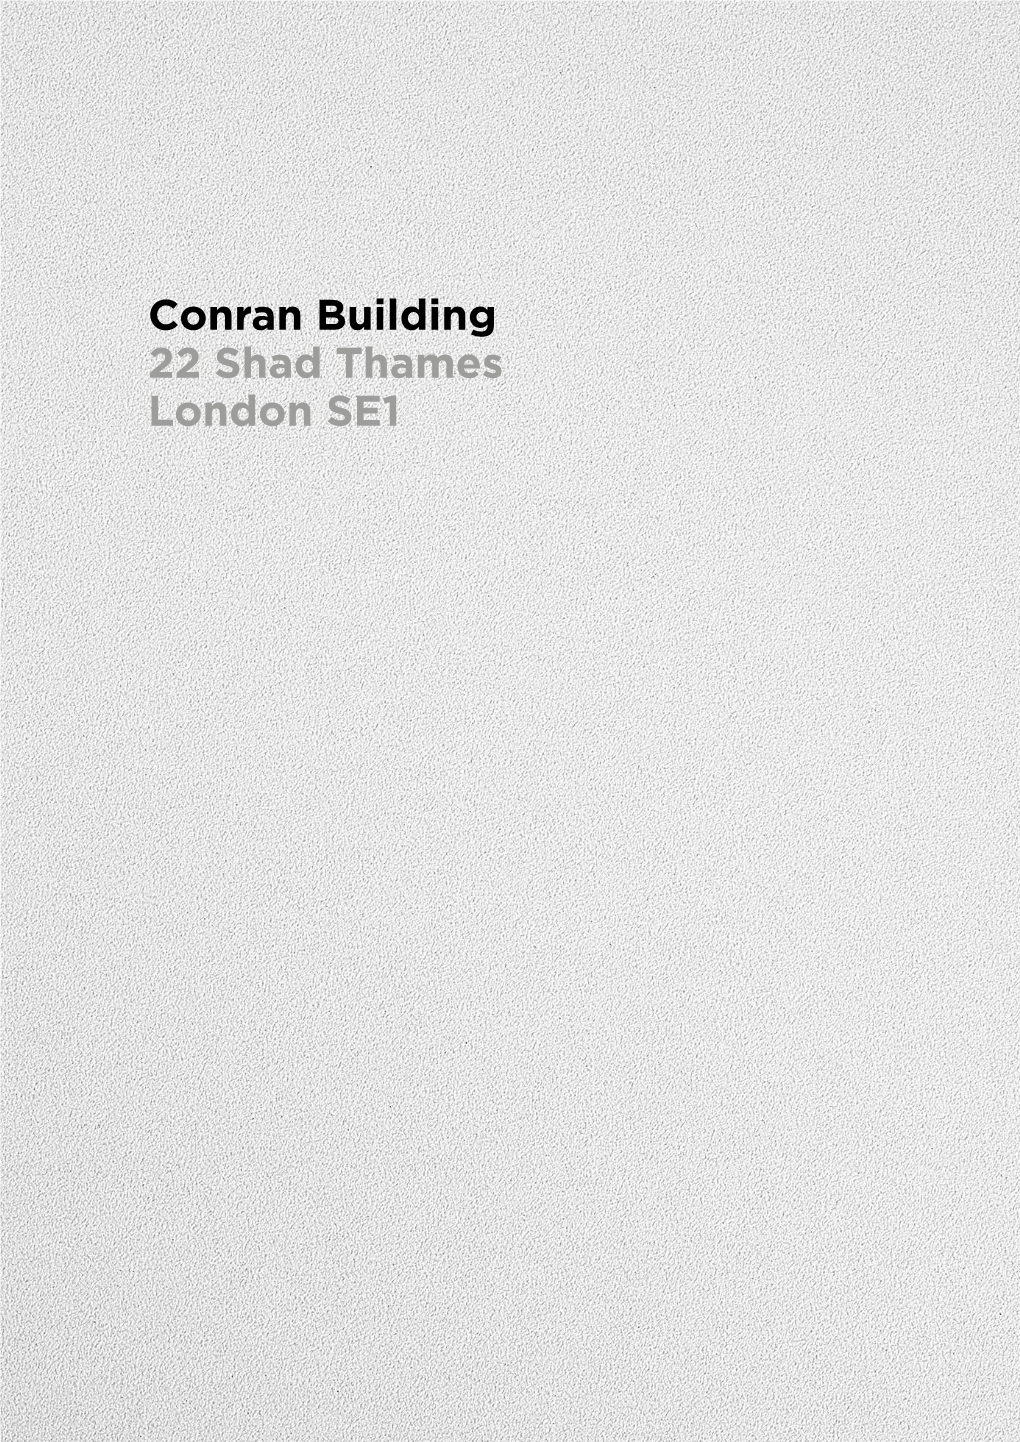 Conran Building 22 Shad Thames London SE1 a Vacant Freehold Residential, Office and Showroom Investment